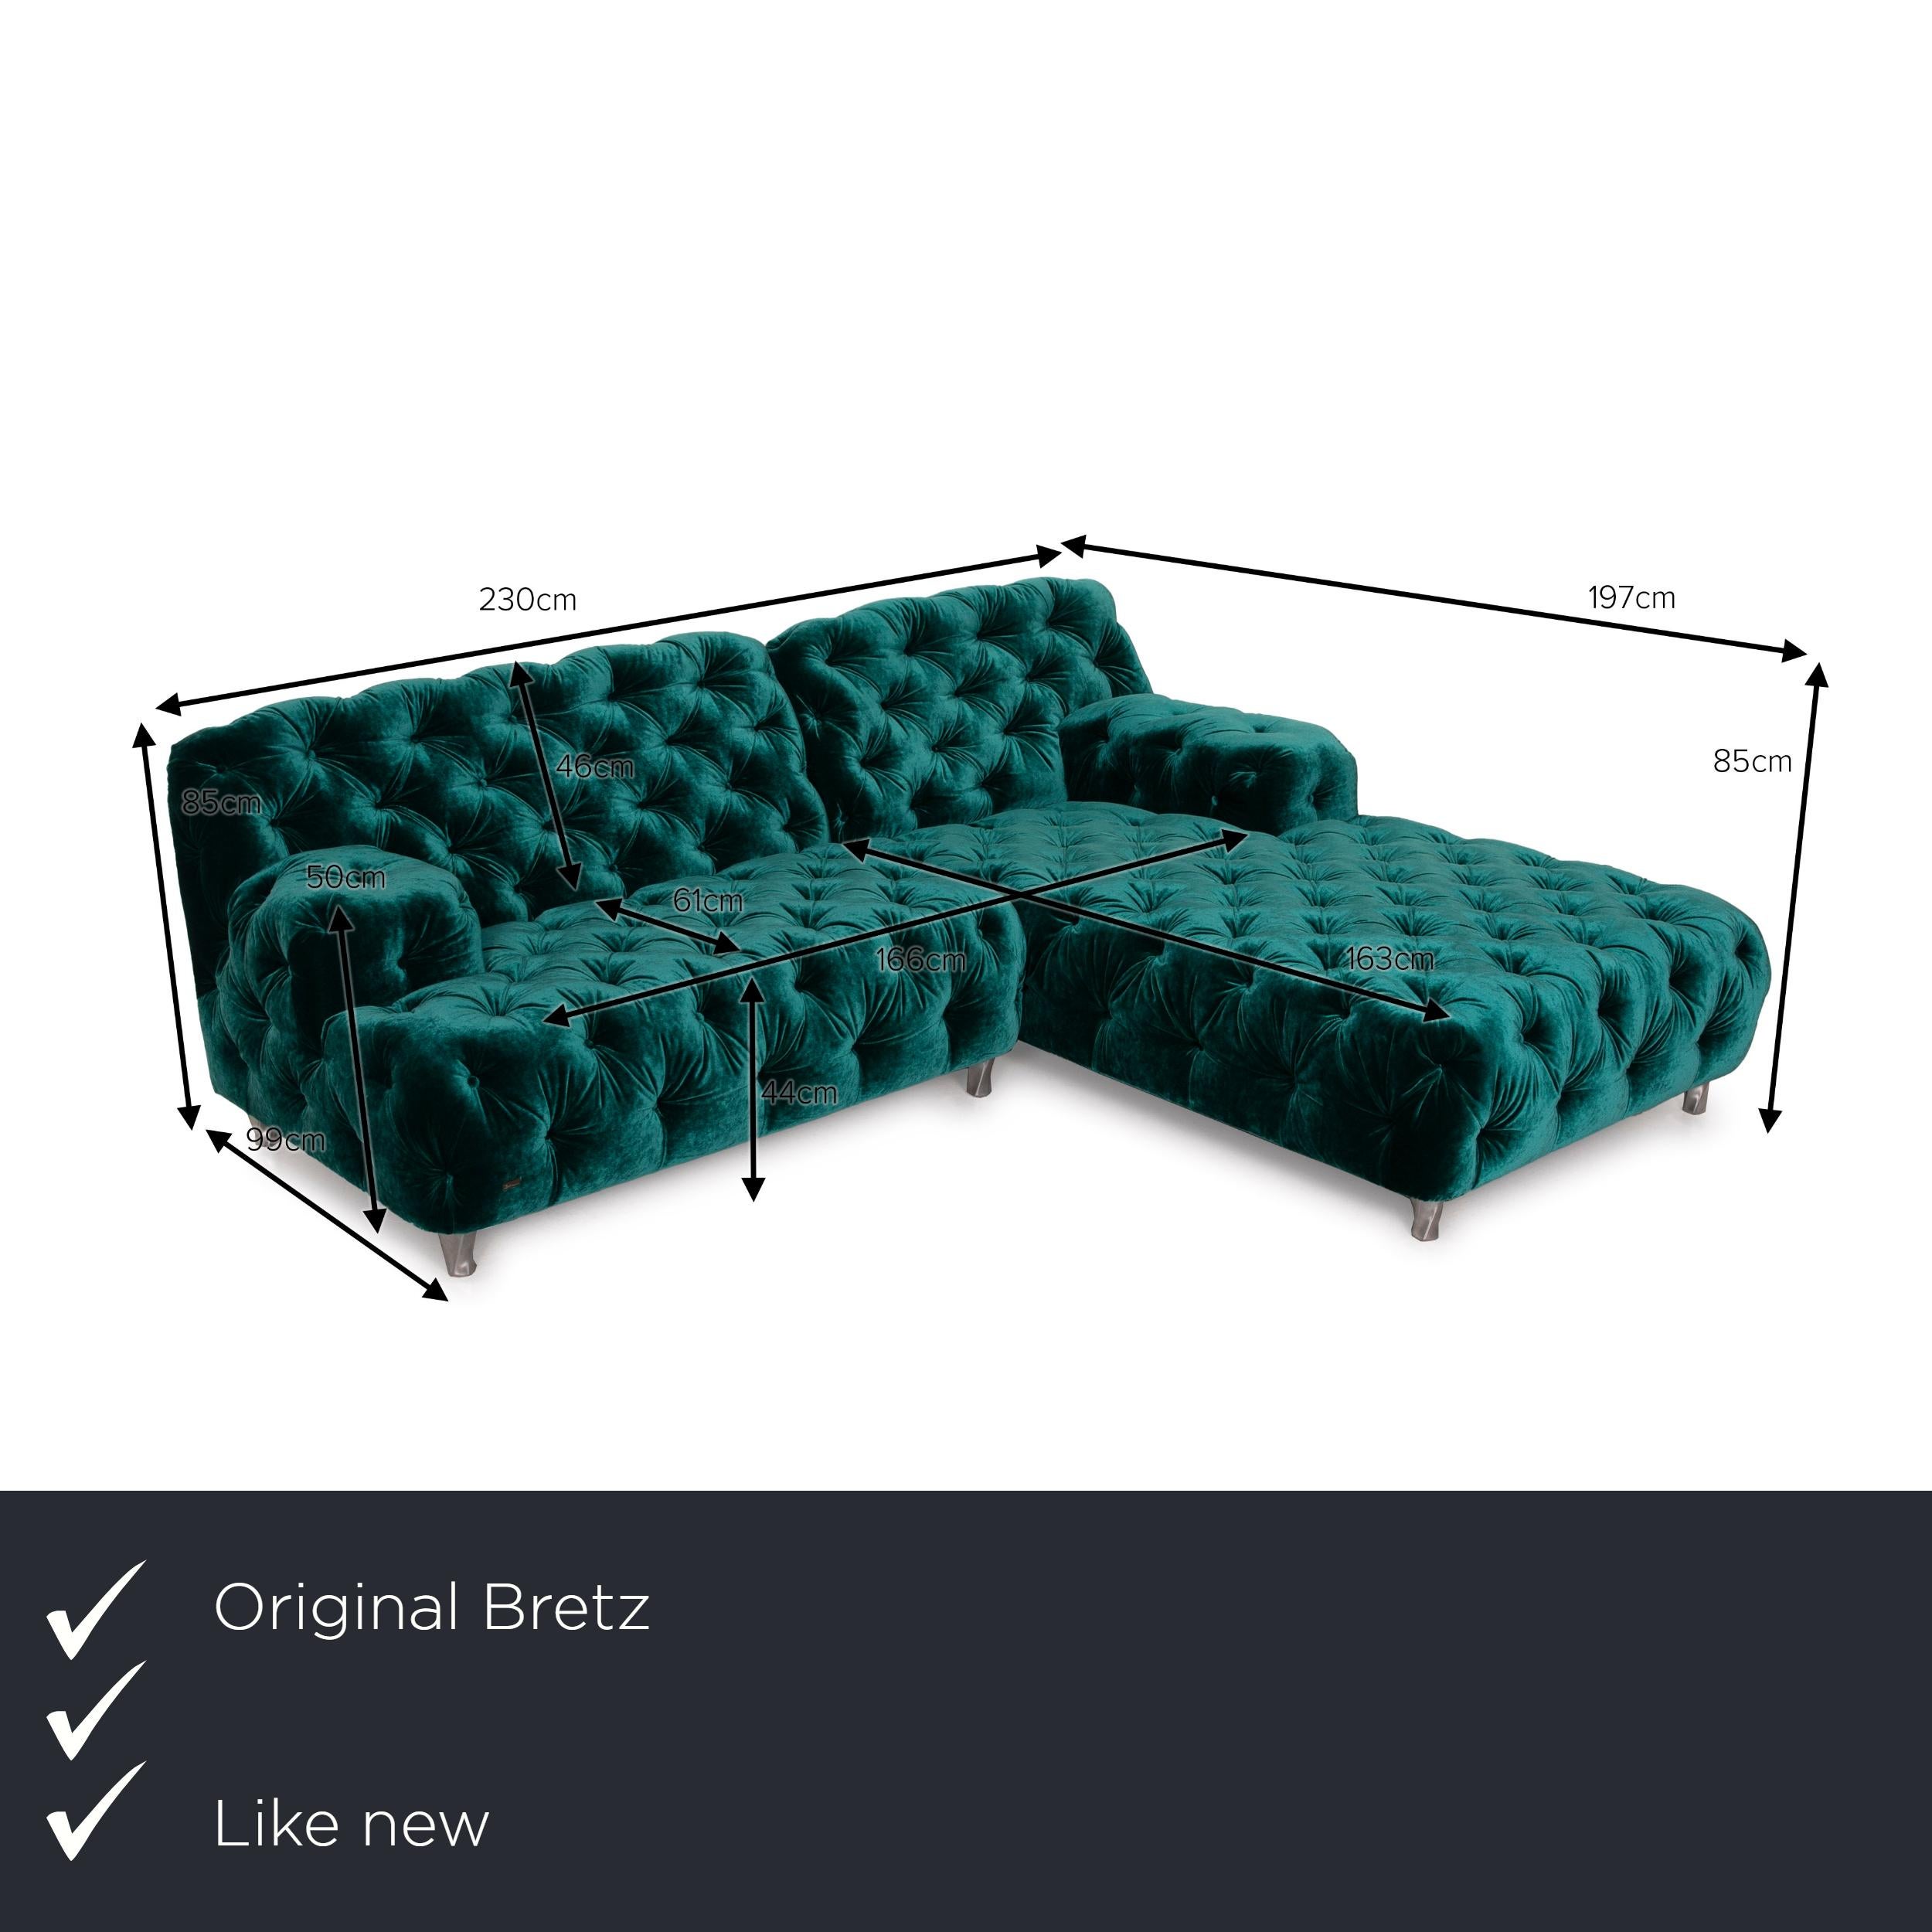 We present to you a Bretz Cocoa Island fabric sofa green corner sofa emerald green living area.

Product measurements in centimeters:

Depth 99
Width 230
Height 85
Seat height 44
Rest height 50
Seat depth 61
Seat width 166
Back height